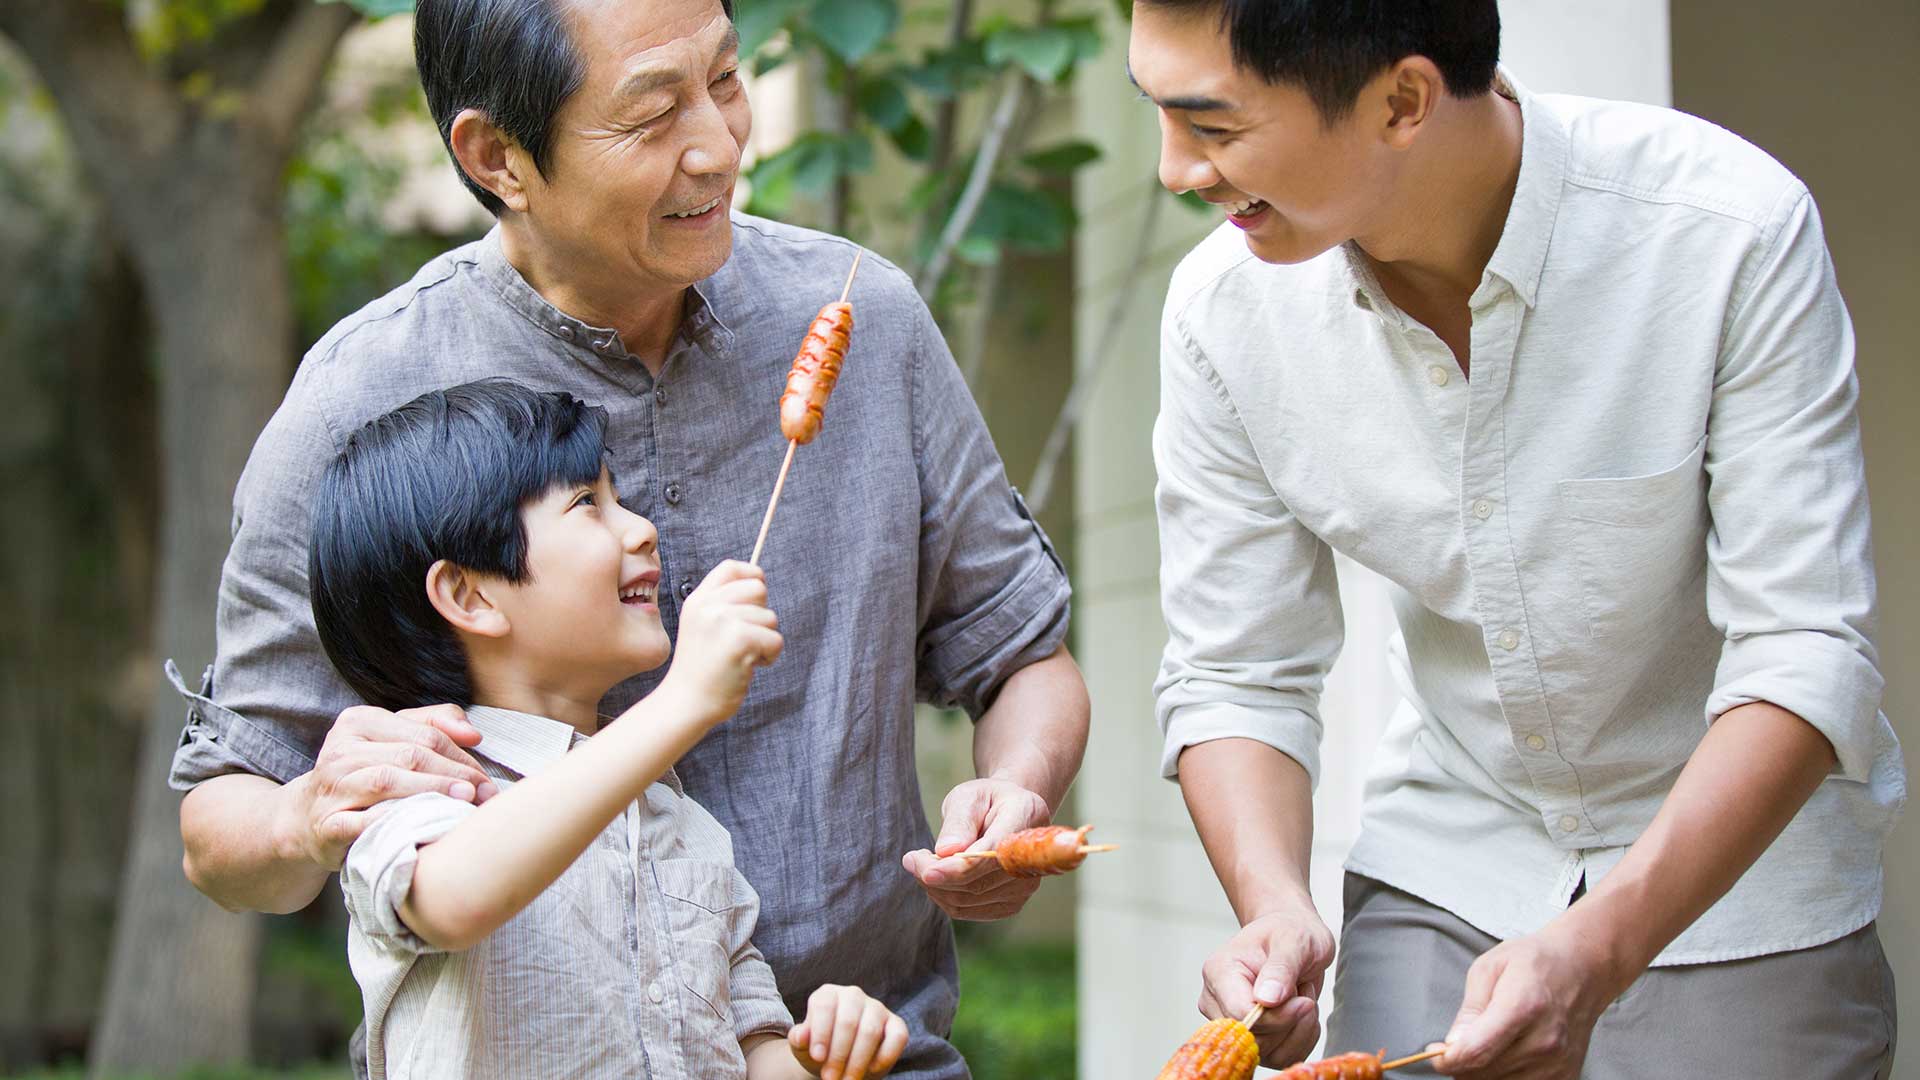 Three generations of grandparents are barbecue ;  the image used for long-term financial management plan for your family